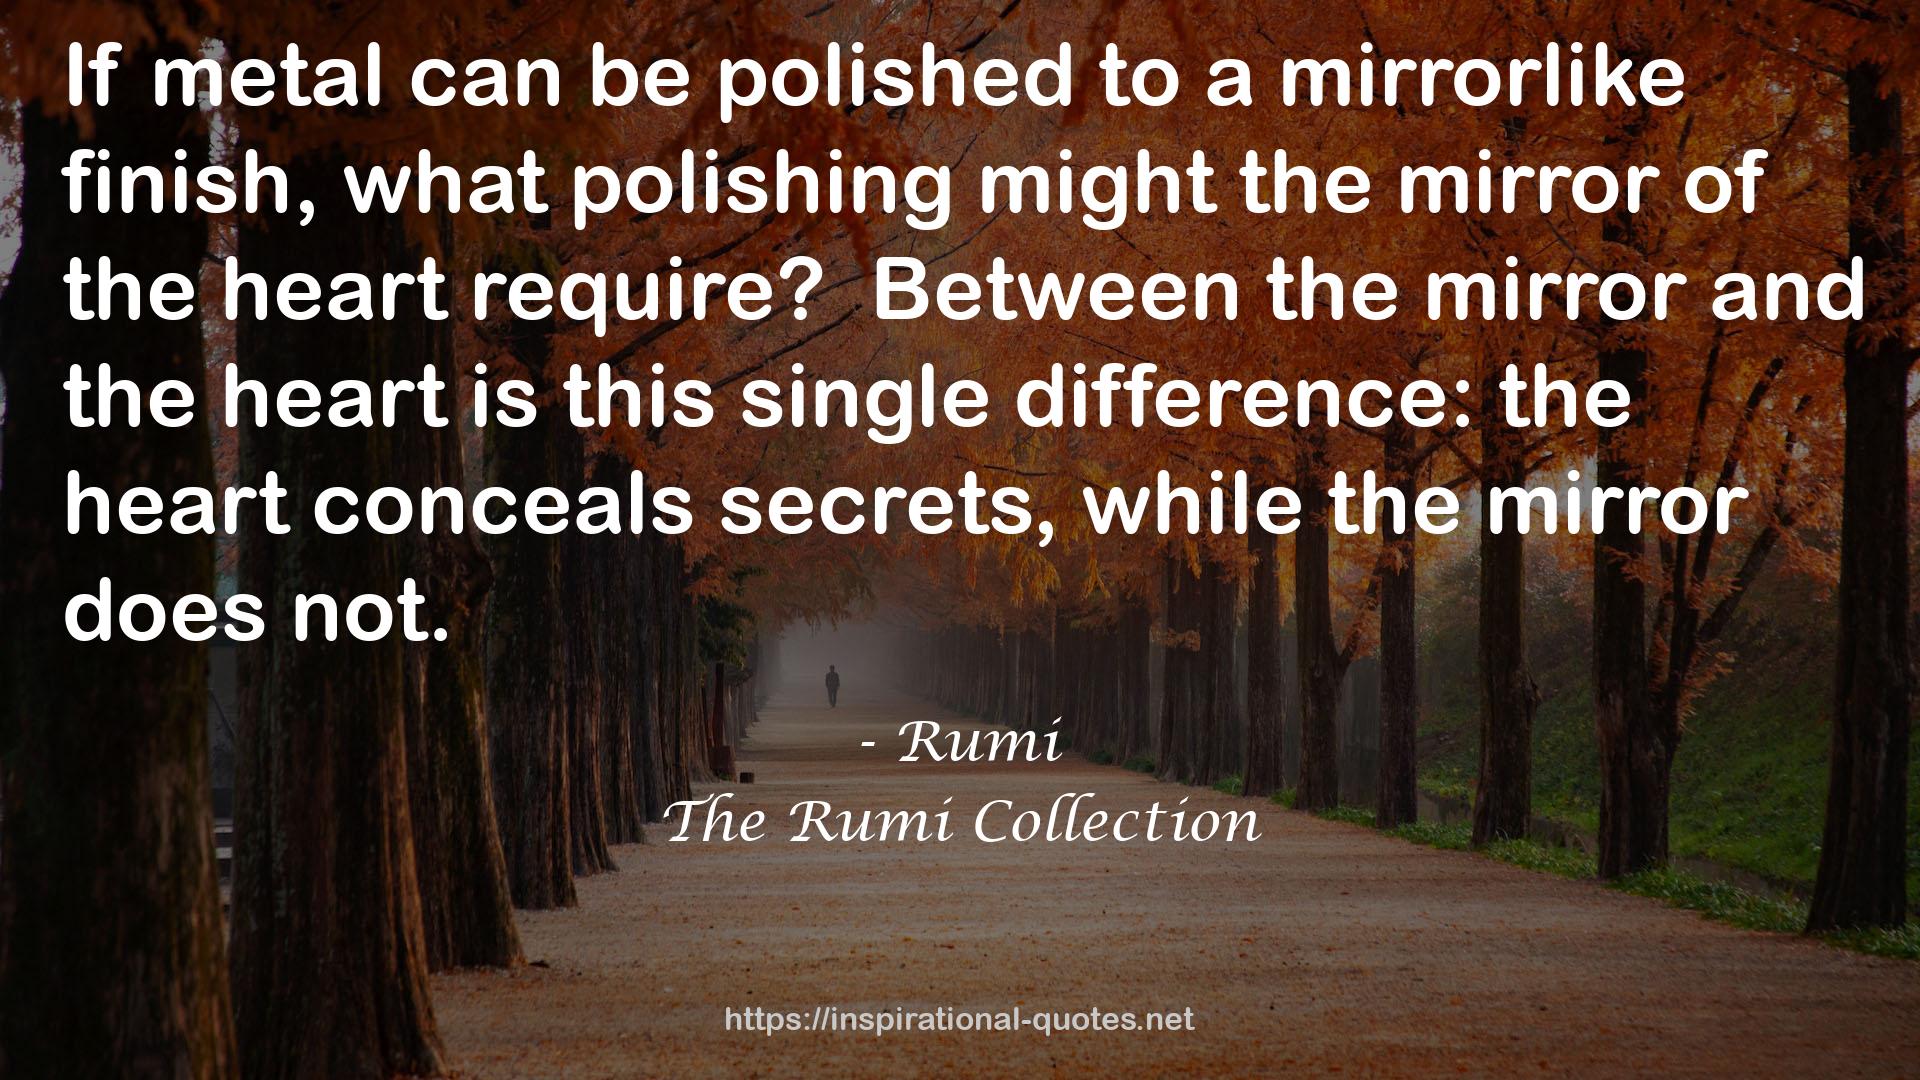 The Rumi Collection QUOTES